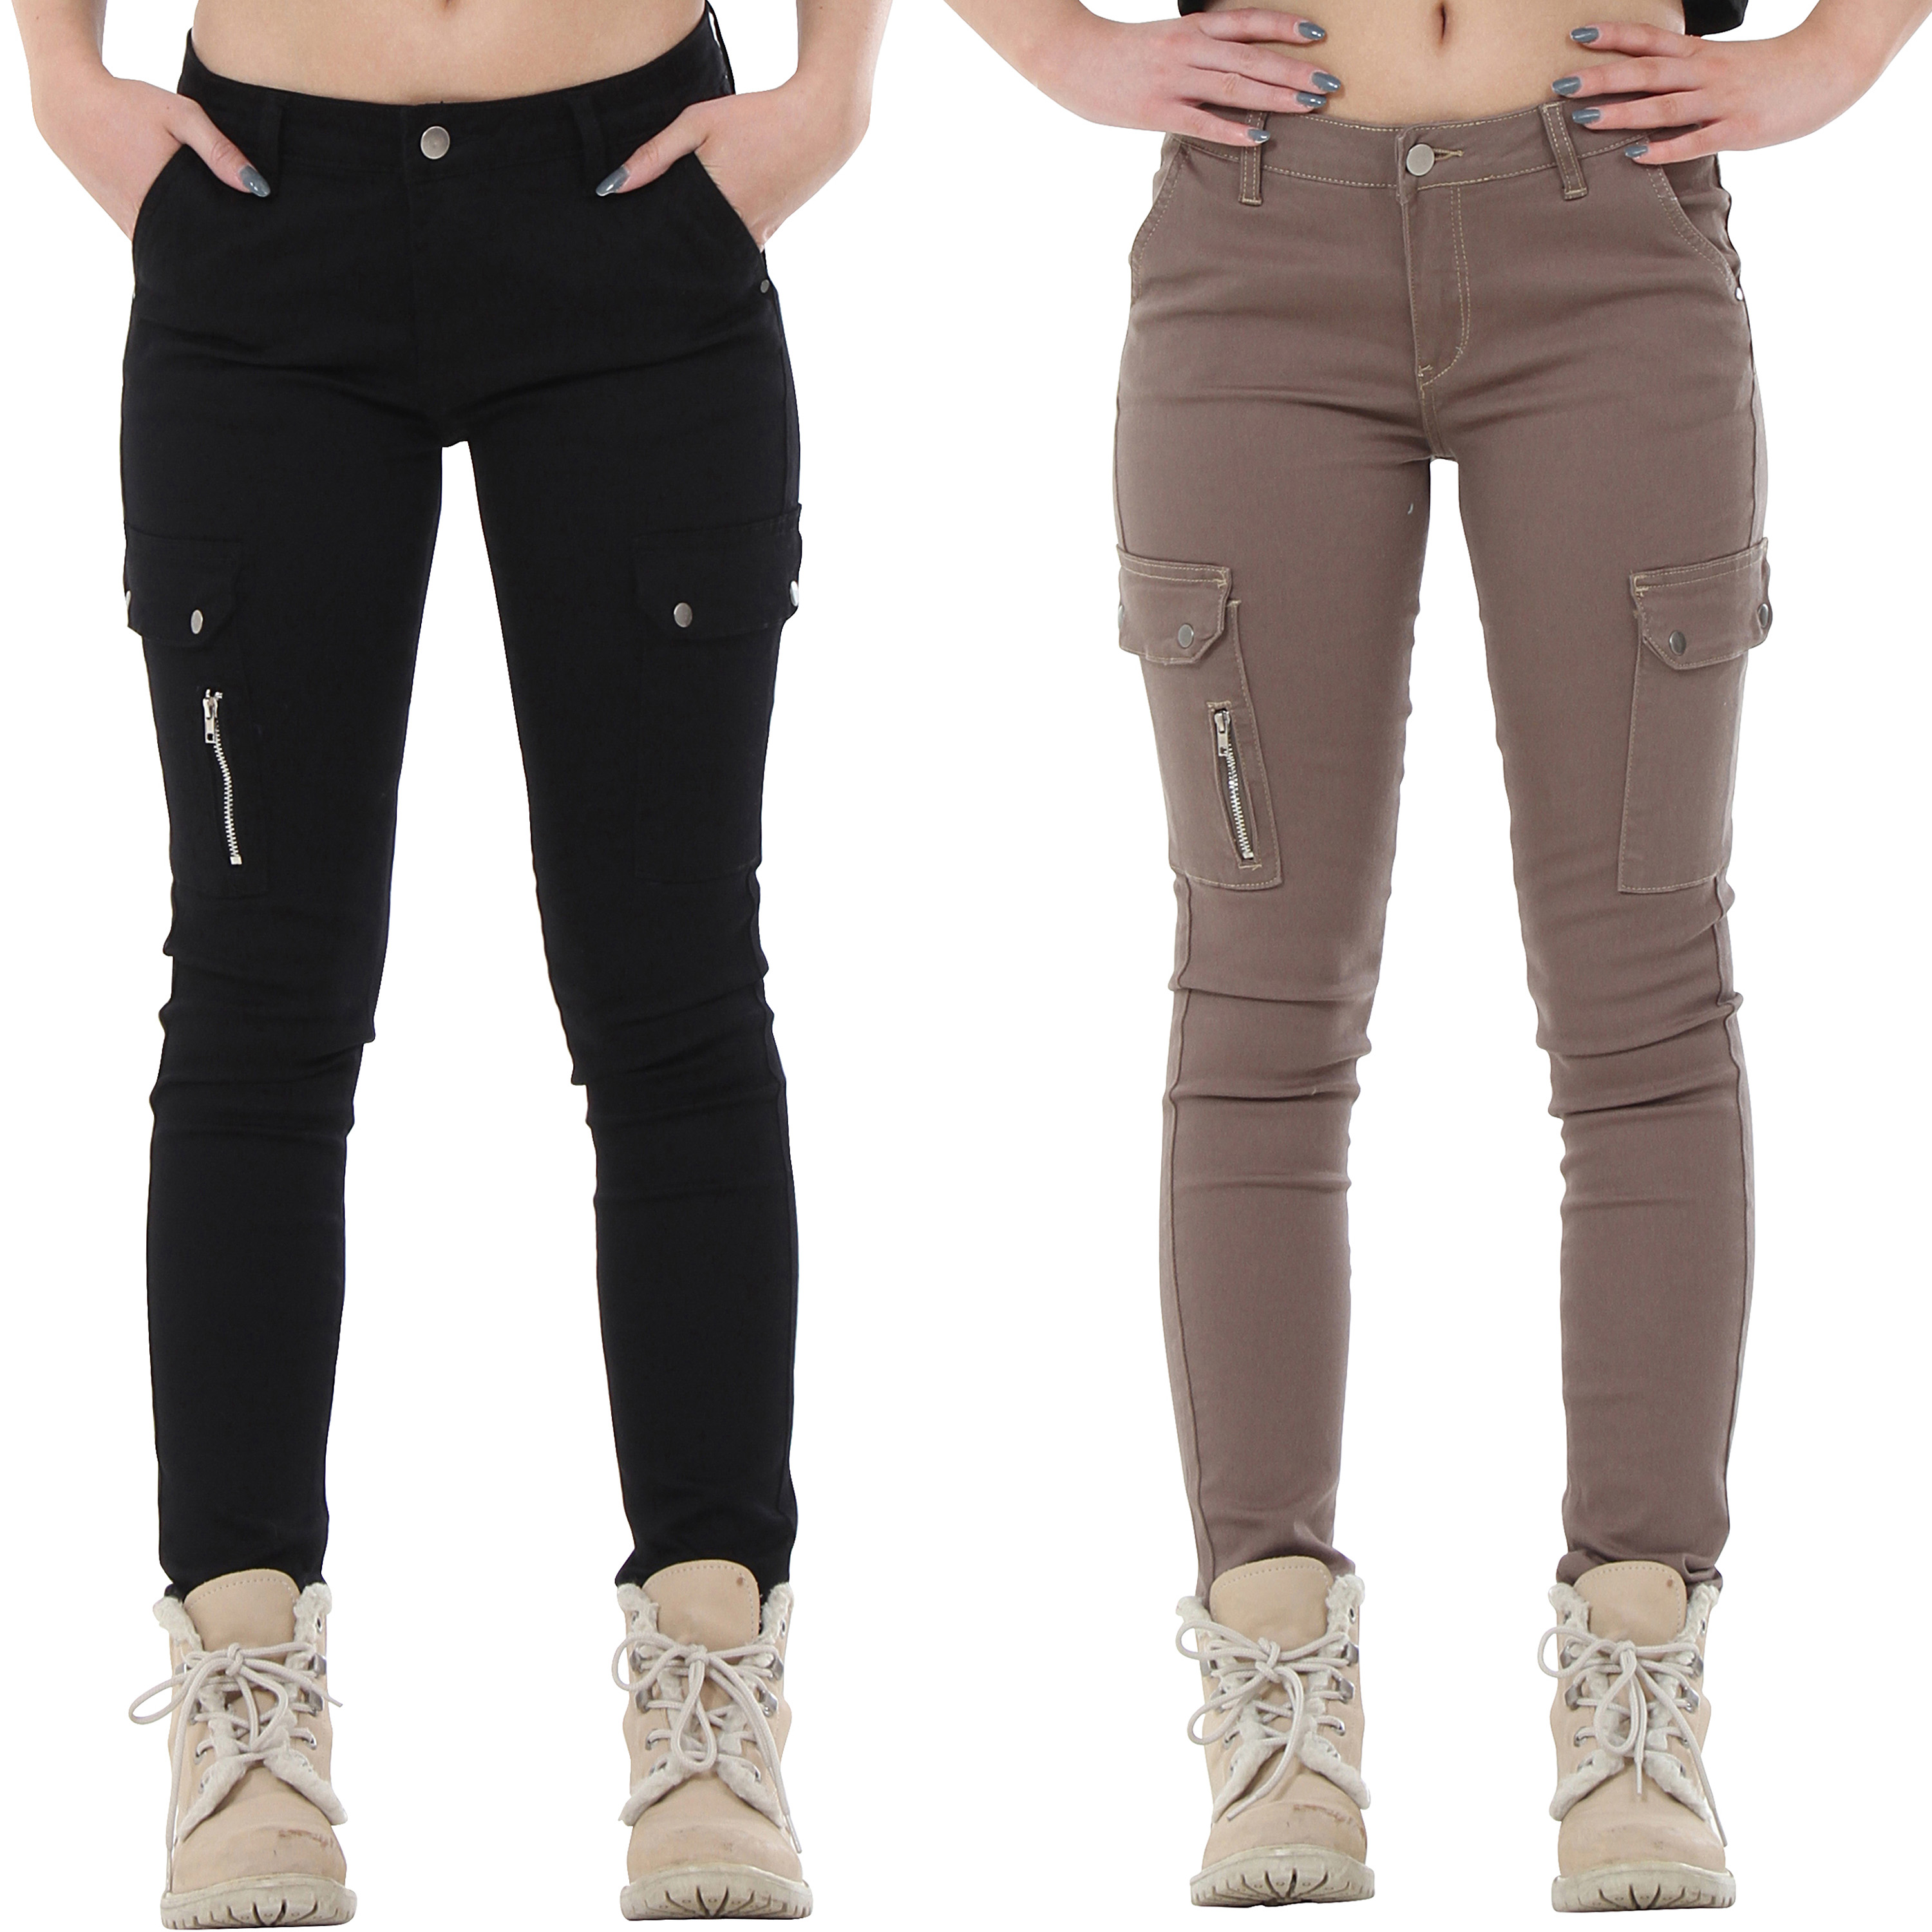 New Womens Ladies Slim Skinny Fitted Combat Pants Cargo Trousers Jeans Short Leg